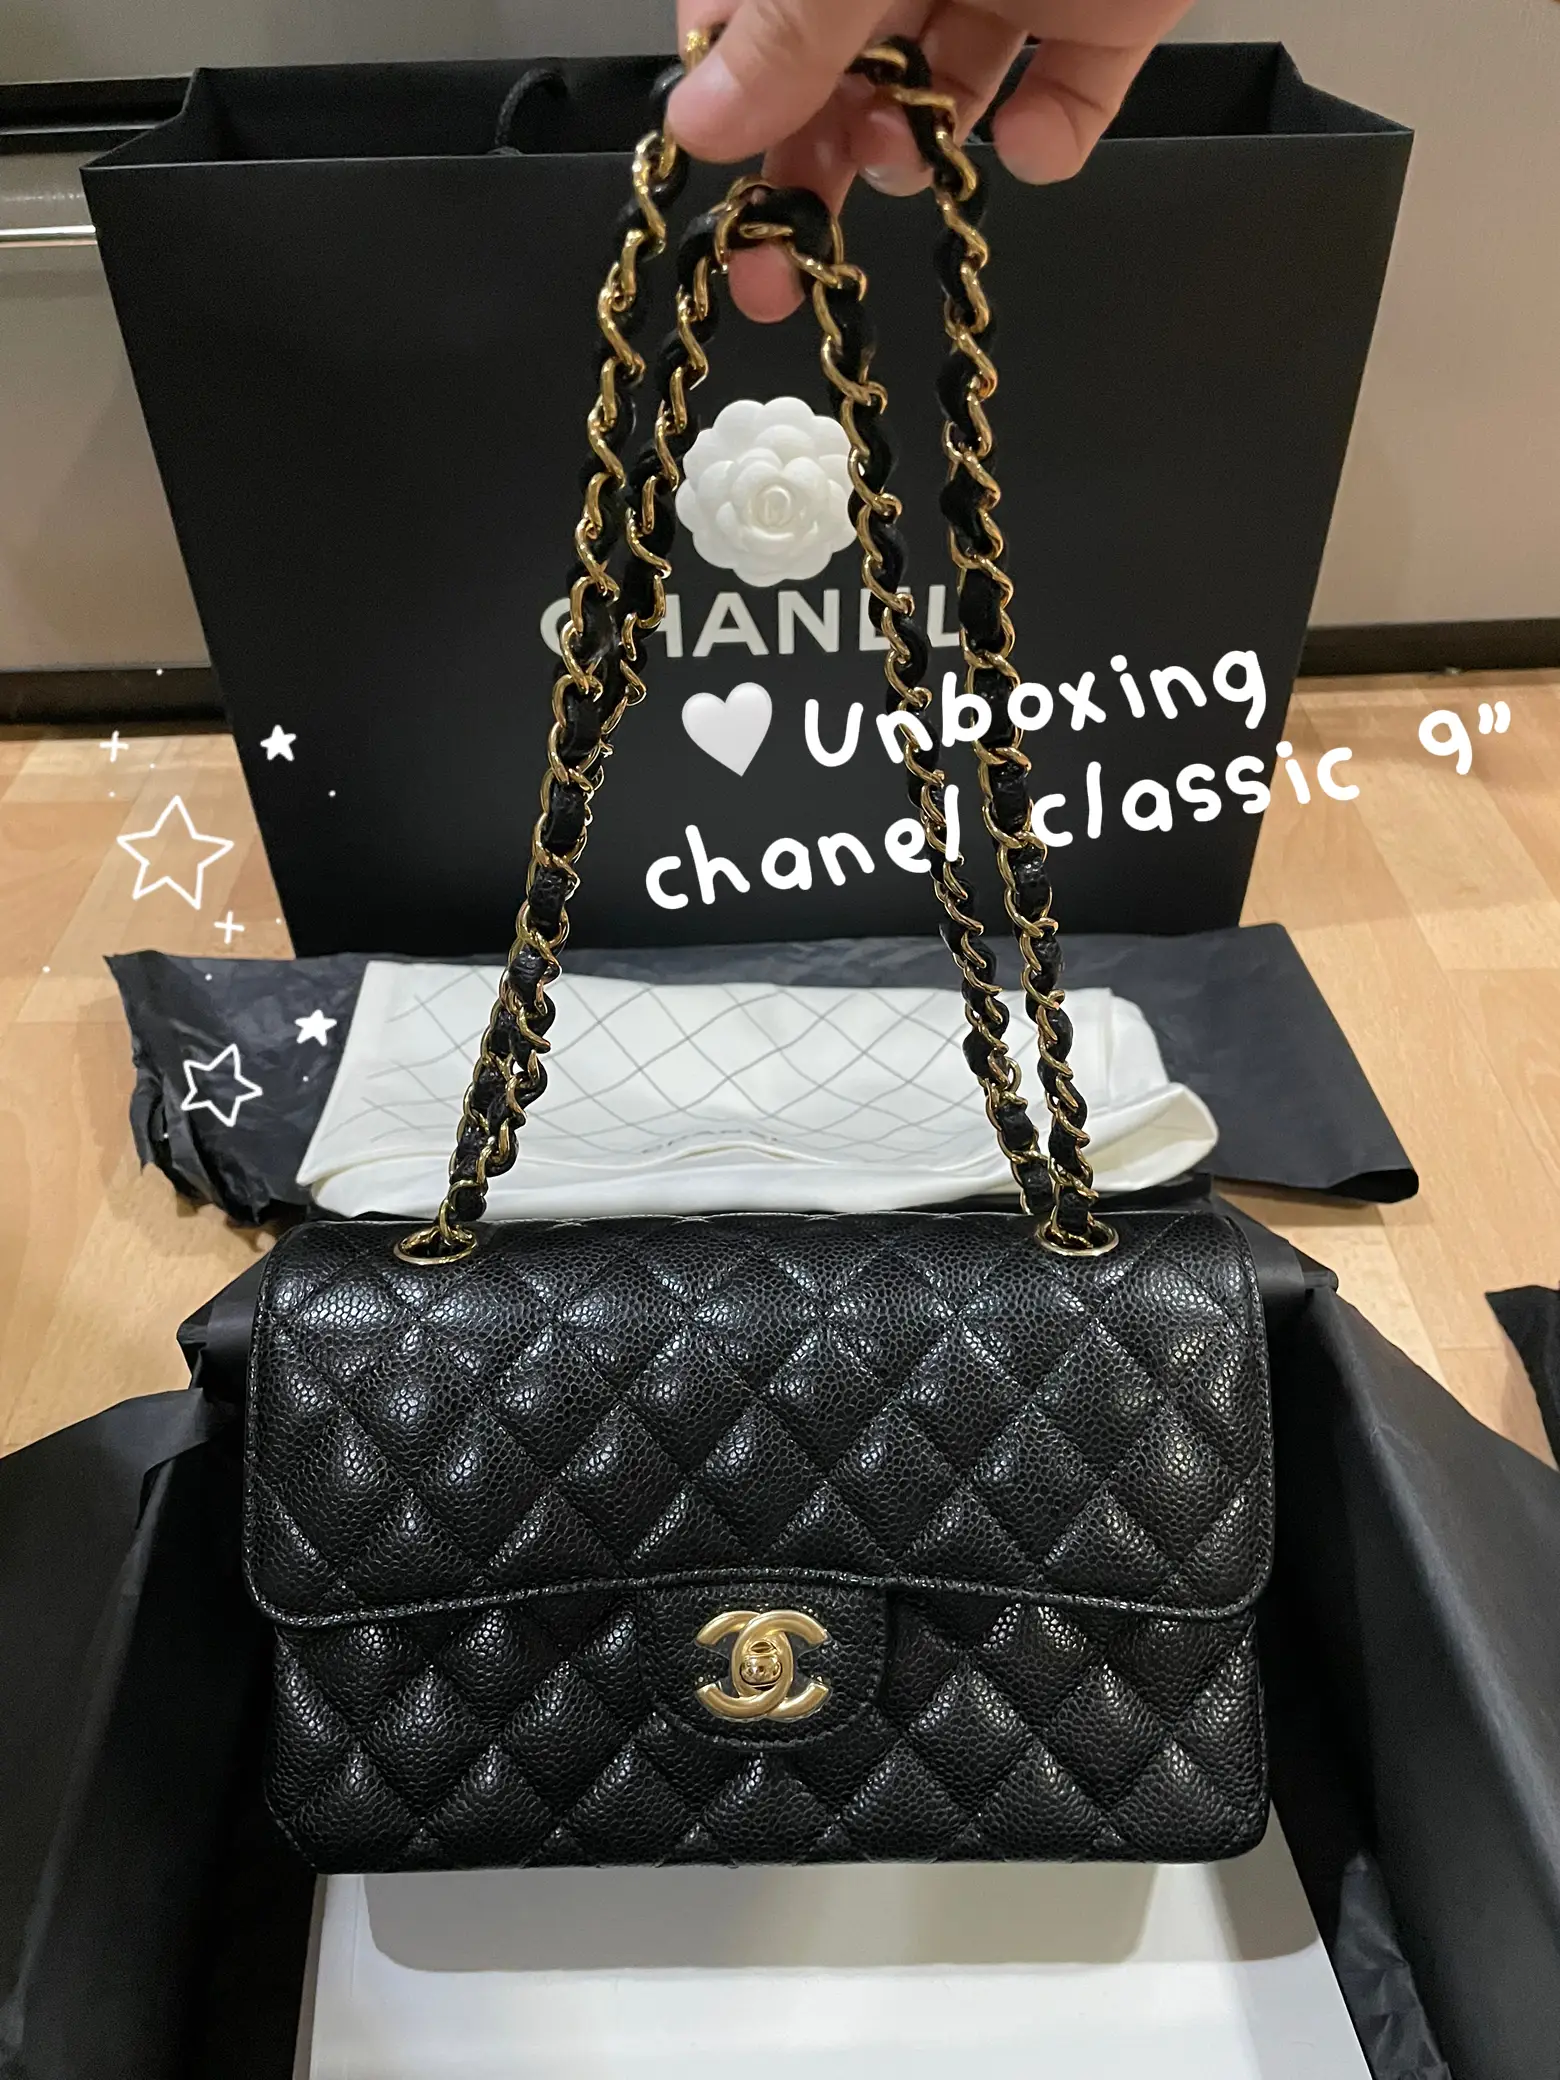 Unboxing chanel classic, the first in my life! 🥺 Should I invest